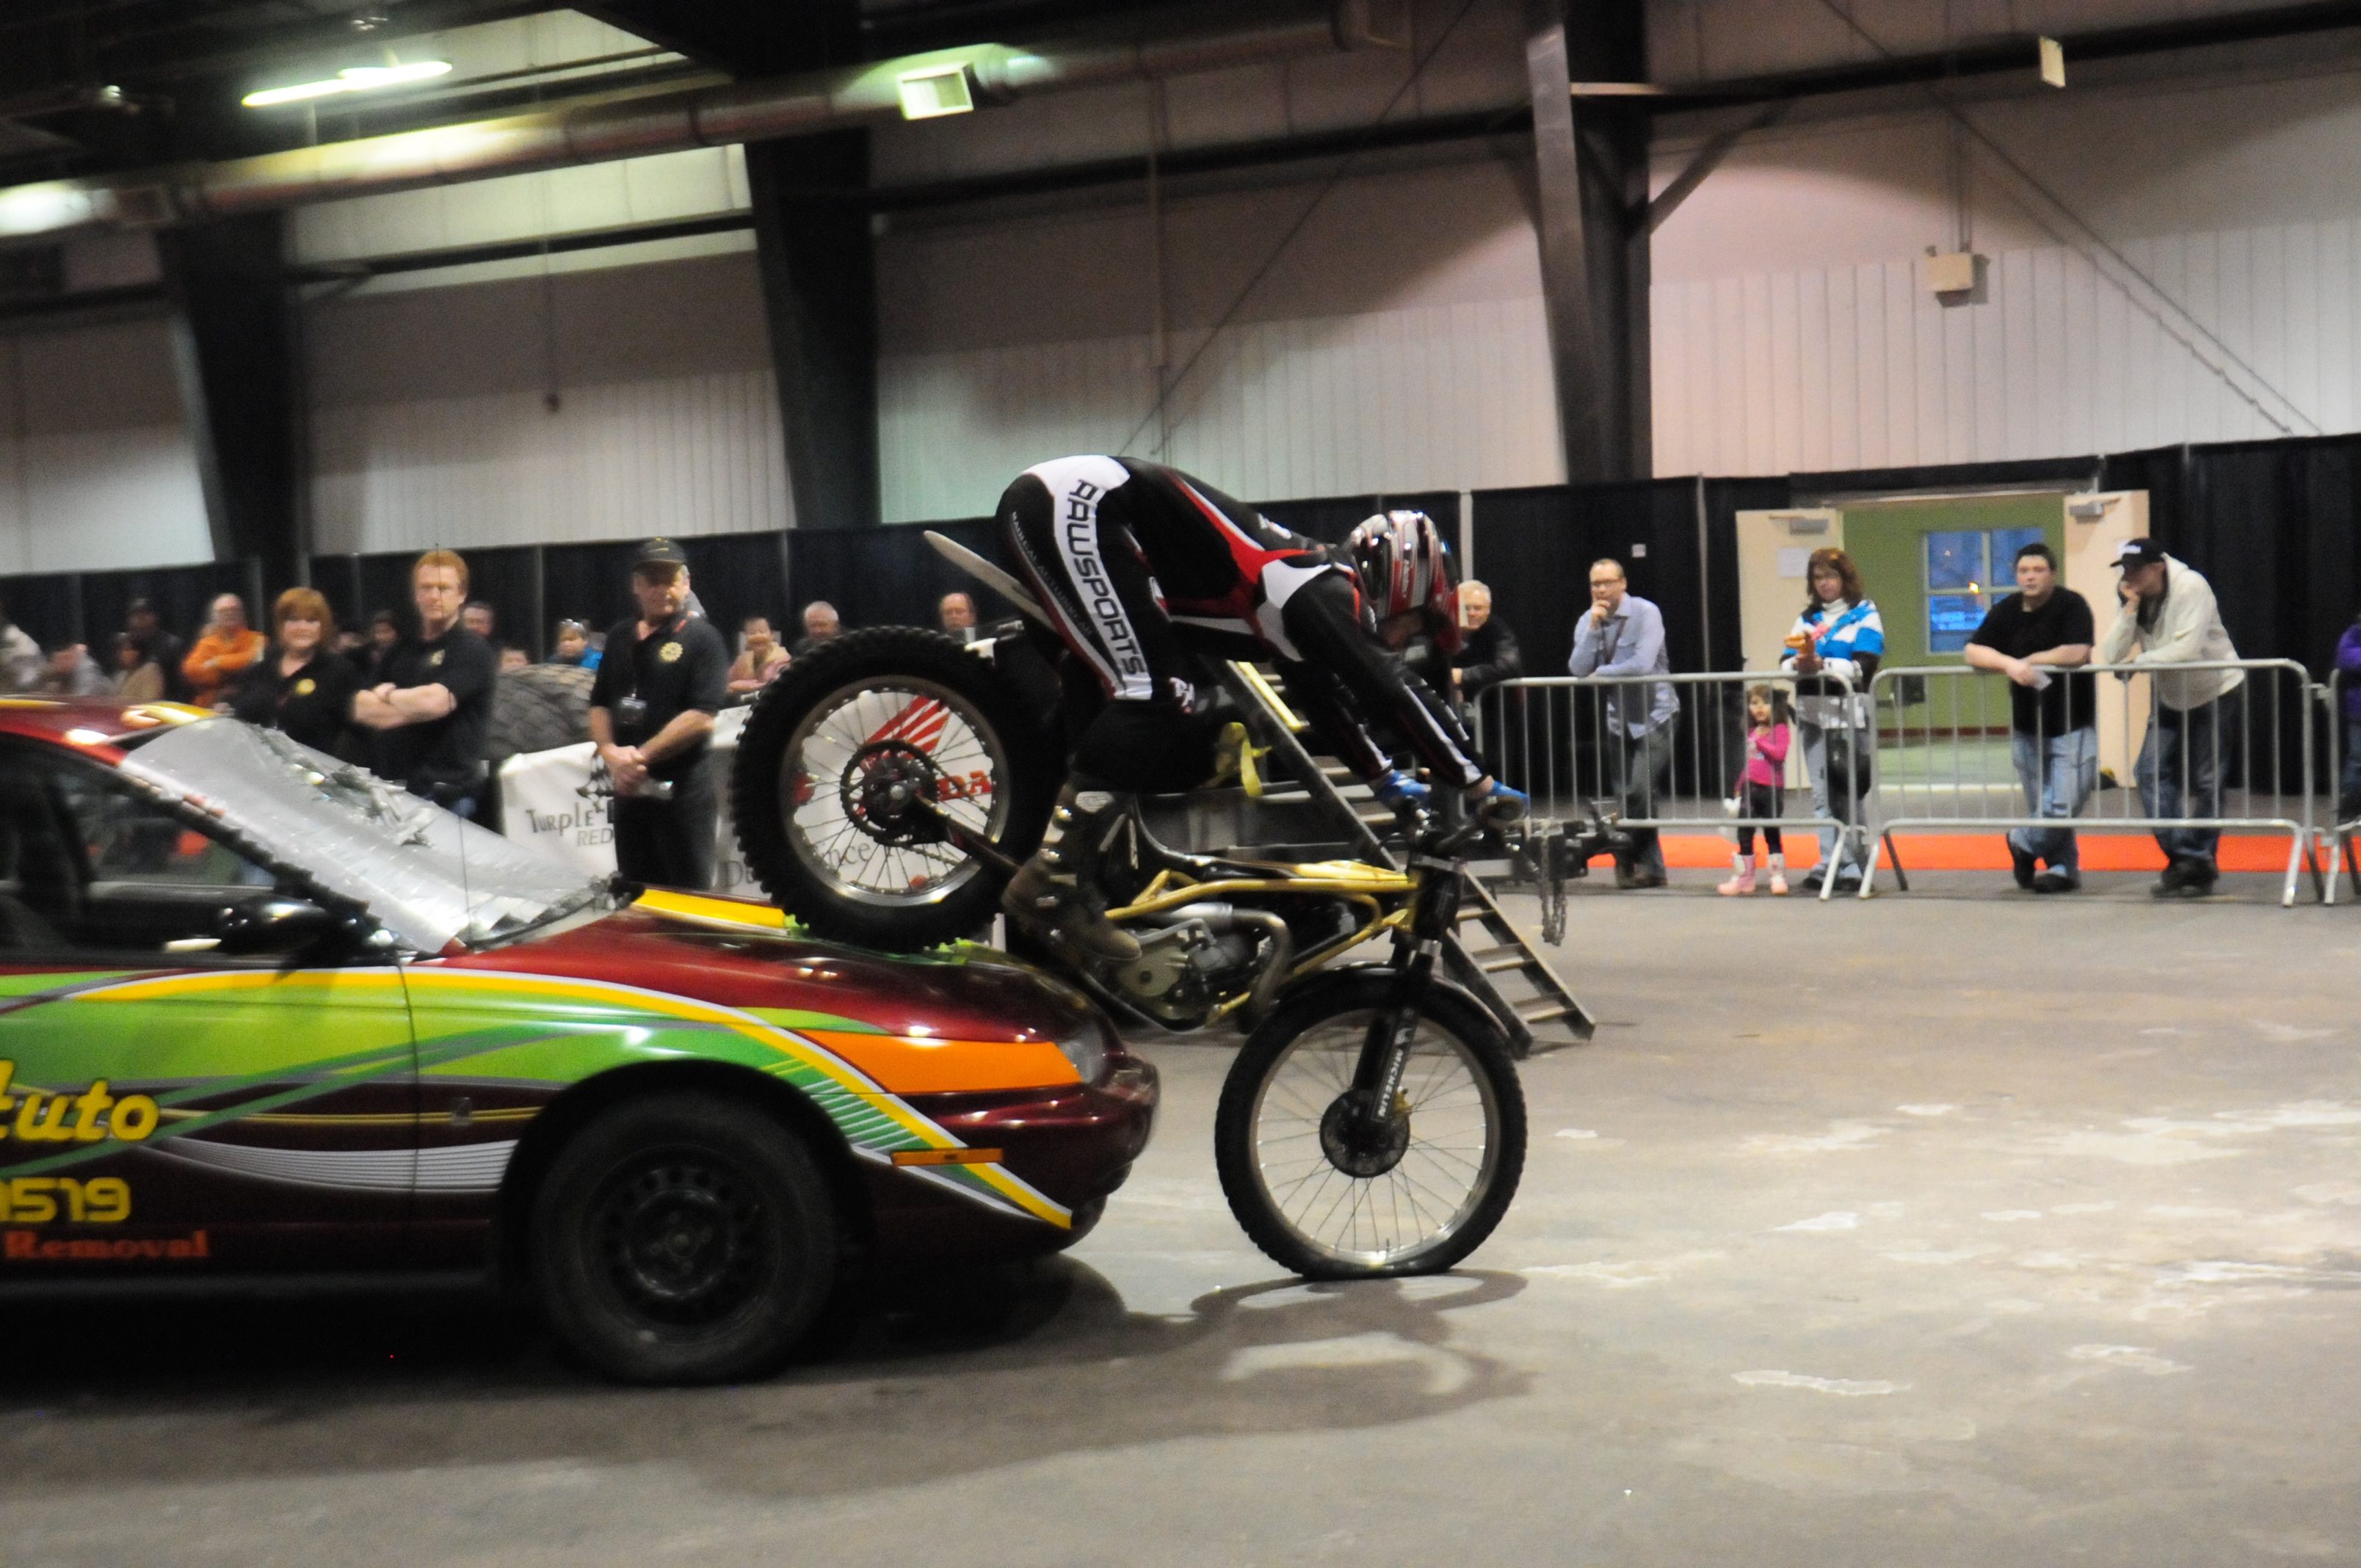 OVER OBSTACLES- Motorbike trials and tricks were just one of the attractions at the 2011 Motorcycle Show in Red Deer this past weekend along with choppers and other motorcycles